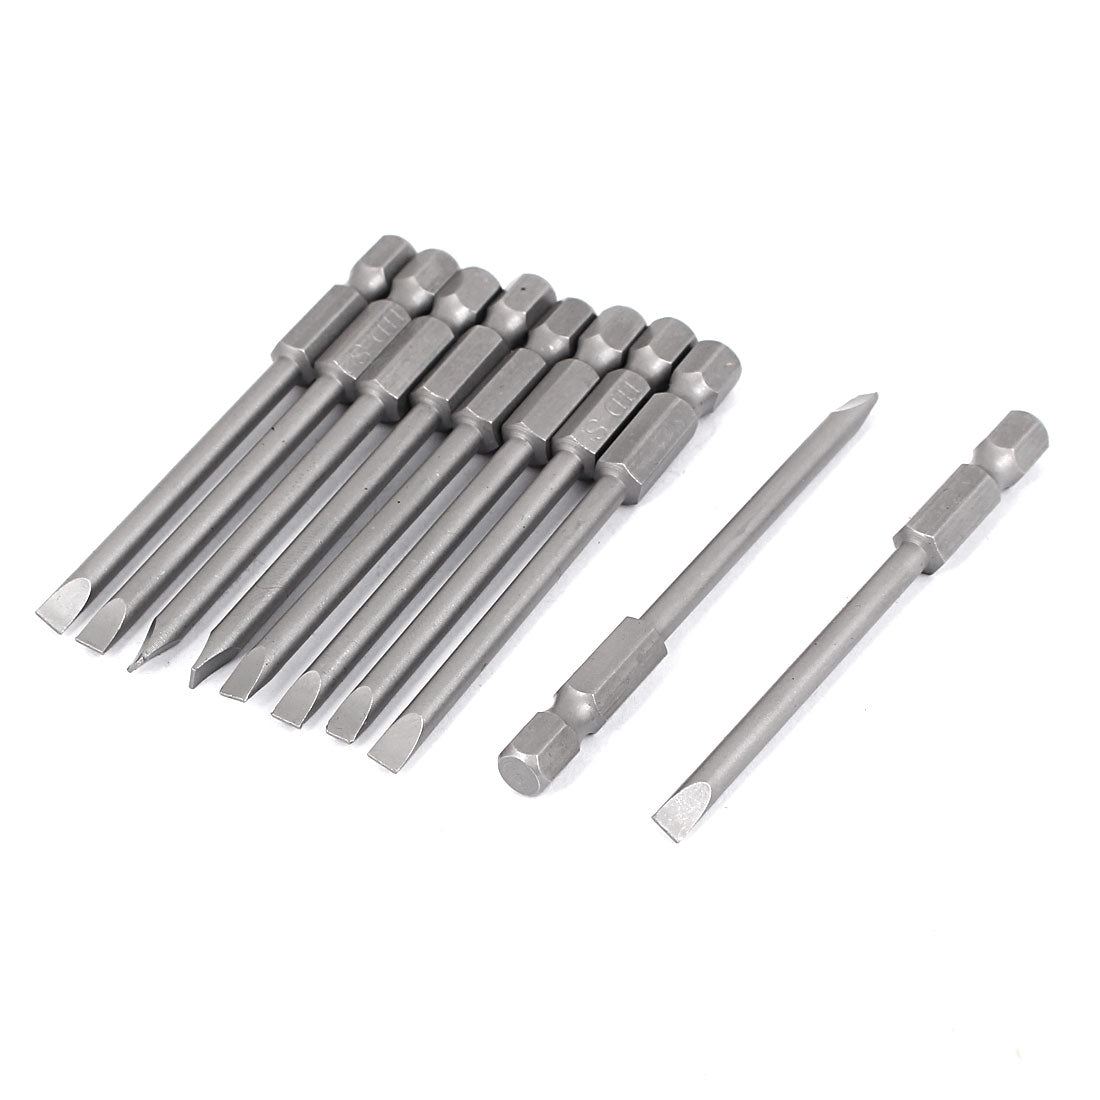 Uxcell Uxcell 1/4"x50mmx2.5mm Hex Shank Magnetic Slotted Screwdriver Bits 10pcs